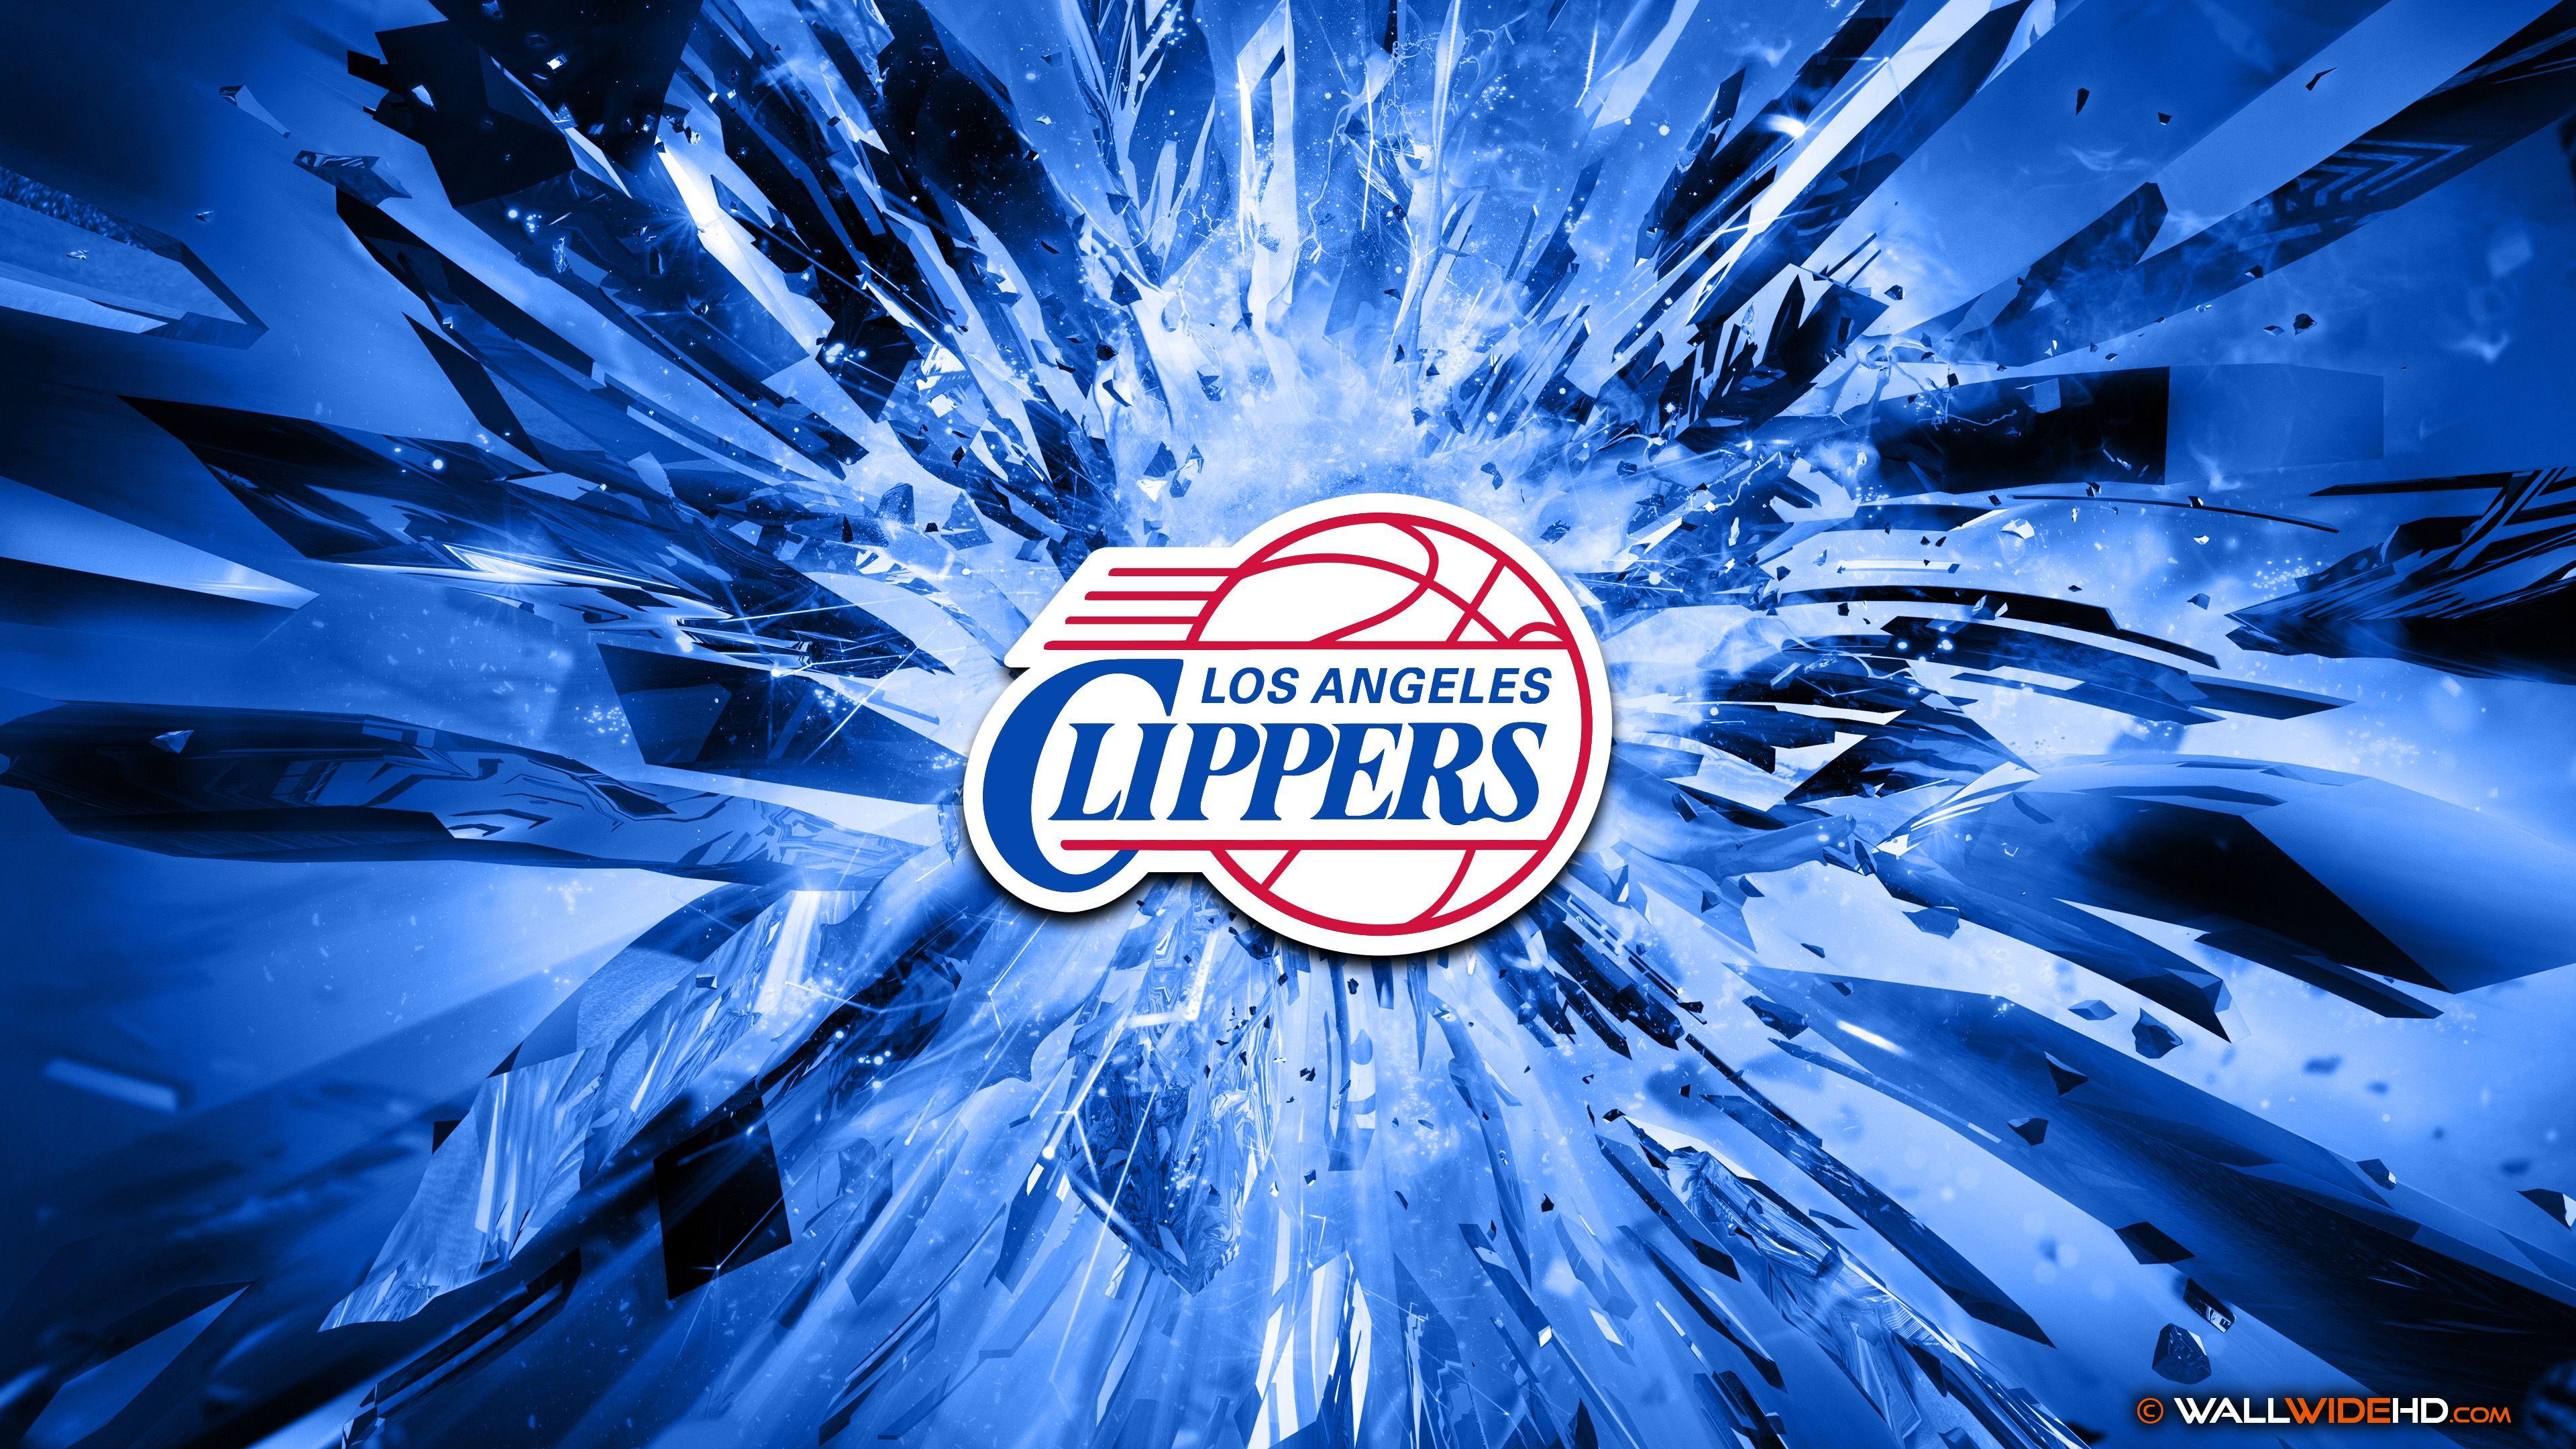 Amazing Los Angeles Clippers HQ Pics. World&;s Greatest Art Site